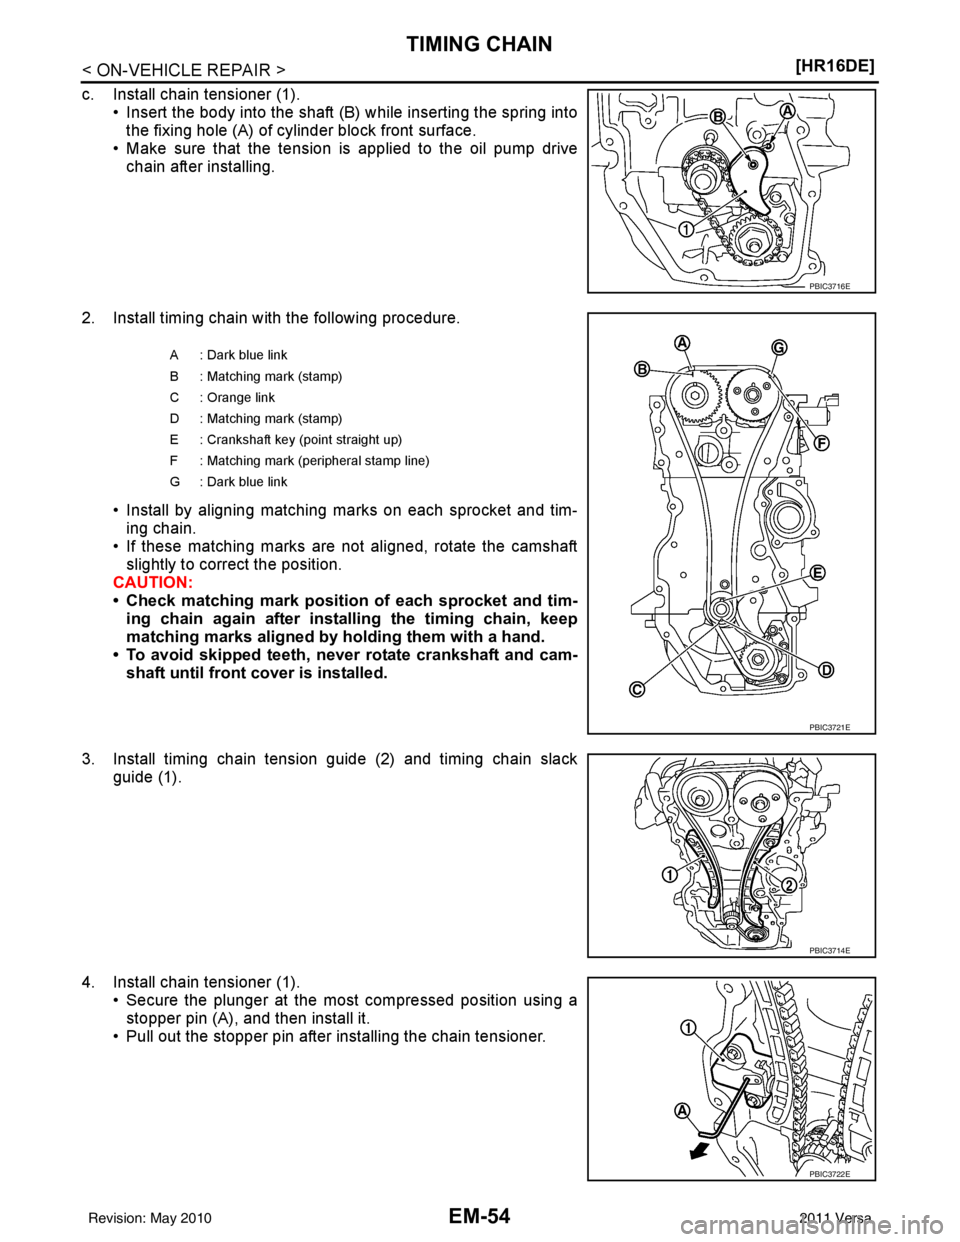 NISSAN LATIO 2011  Service Repair Manual EM-54
< ON-VEHICLE REPAIR >[HR16DE]
TIMING CHAIN
c. Install chain tensioner (1).
• Insert the body into the shaft (B) while inserting the spring intothe fixing hole (A) of cylinder block front surfa